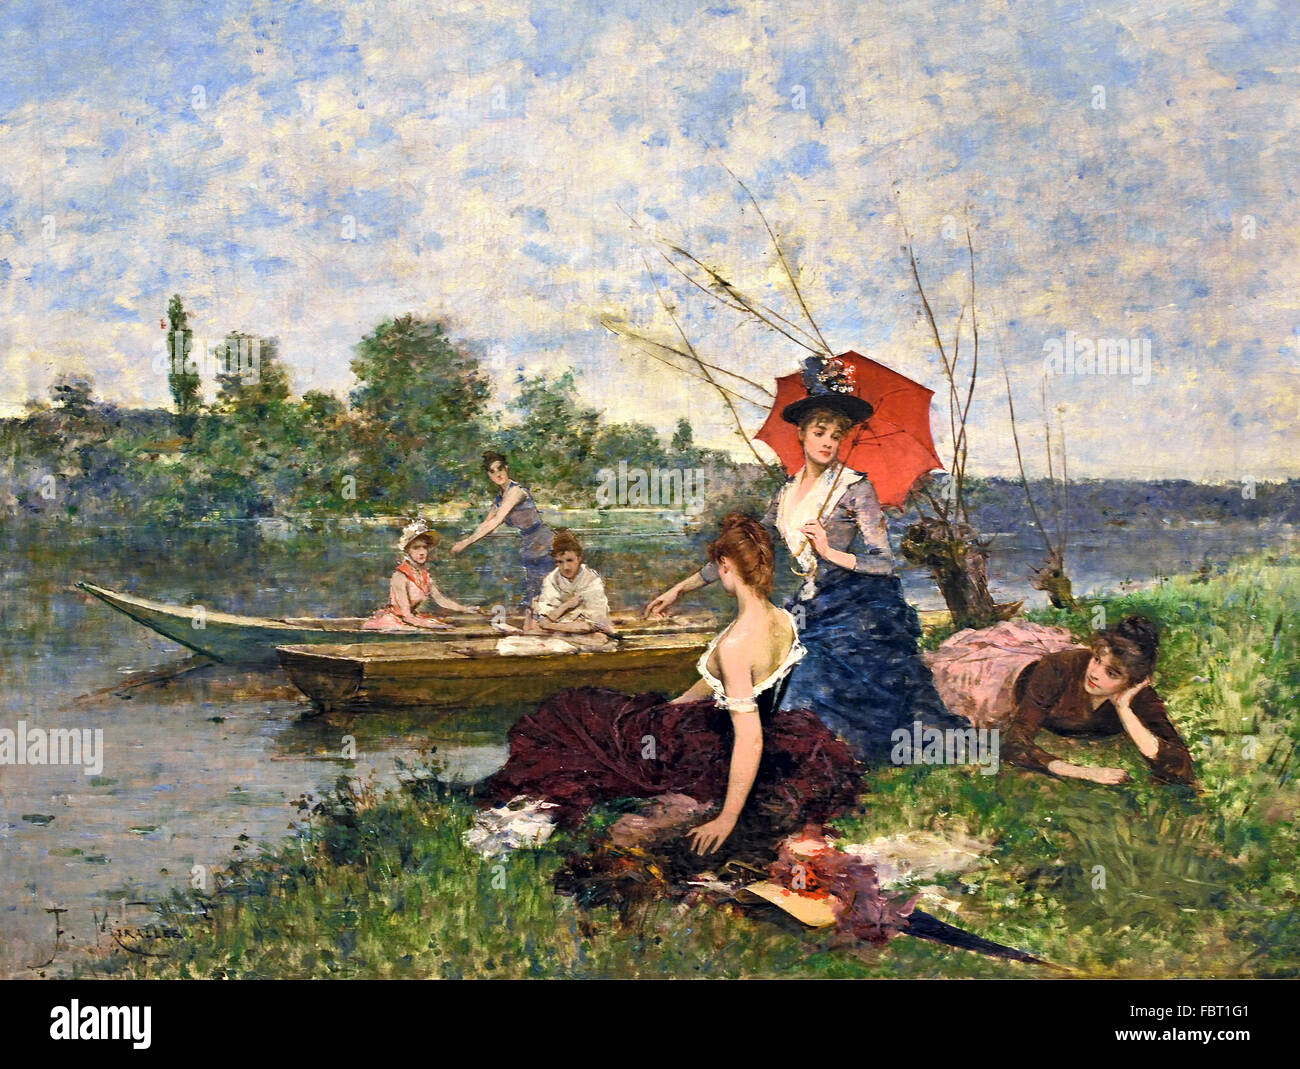 Boating ca. 1888-1890 Francesc Miralles i Galaup 1848 - 1905 Andalusia Spanish Spain Stock Photo